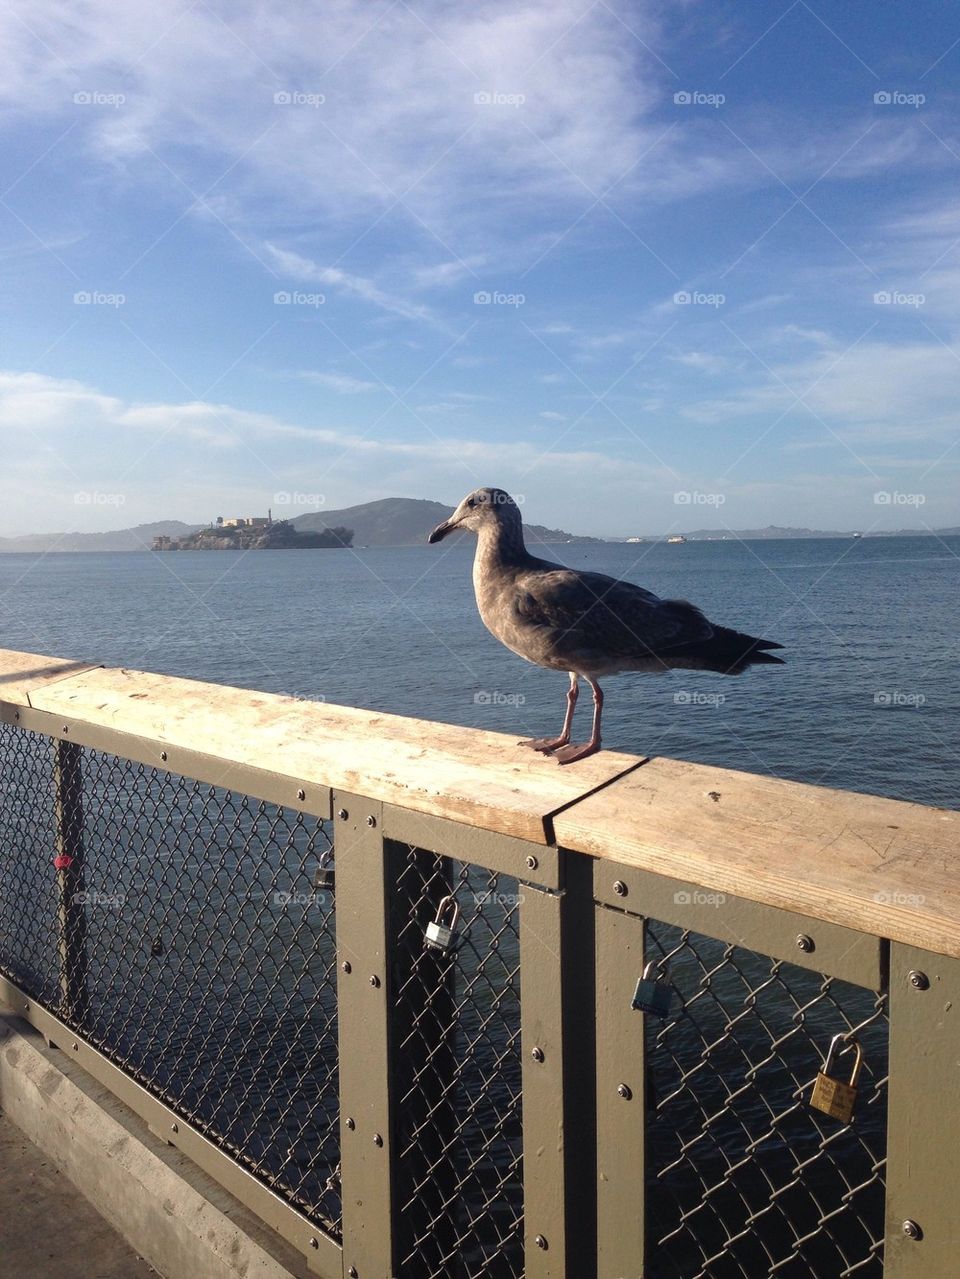 One fine day at Pier 39